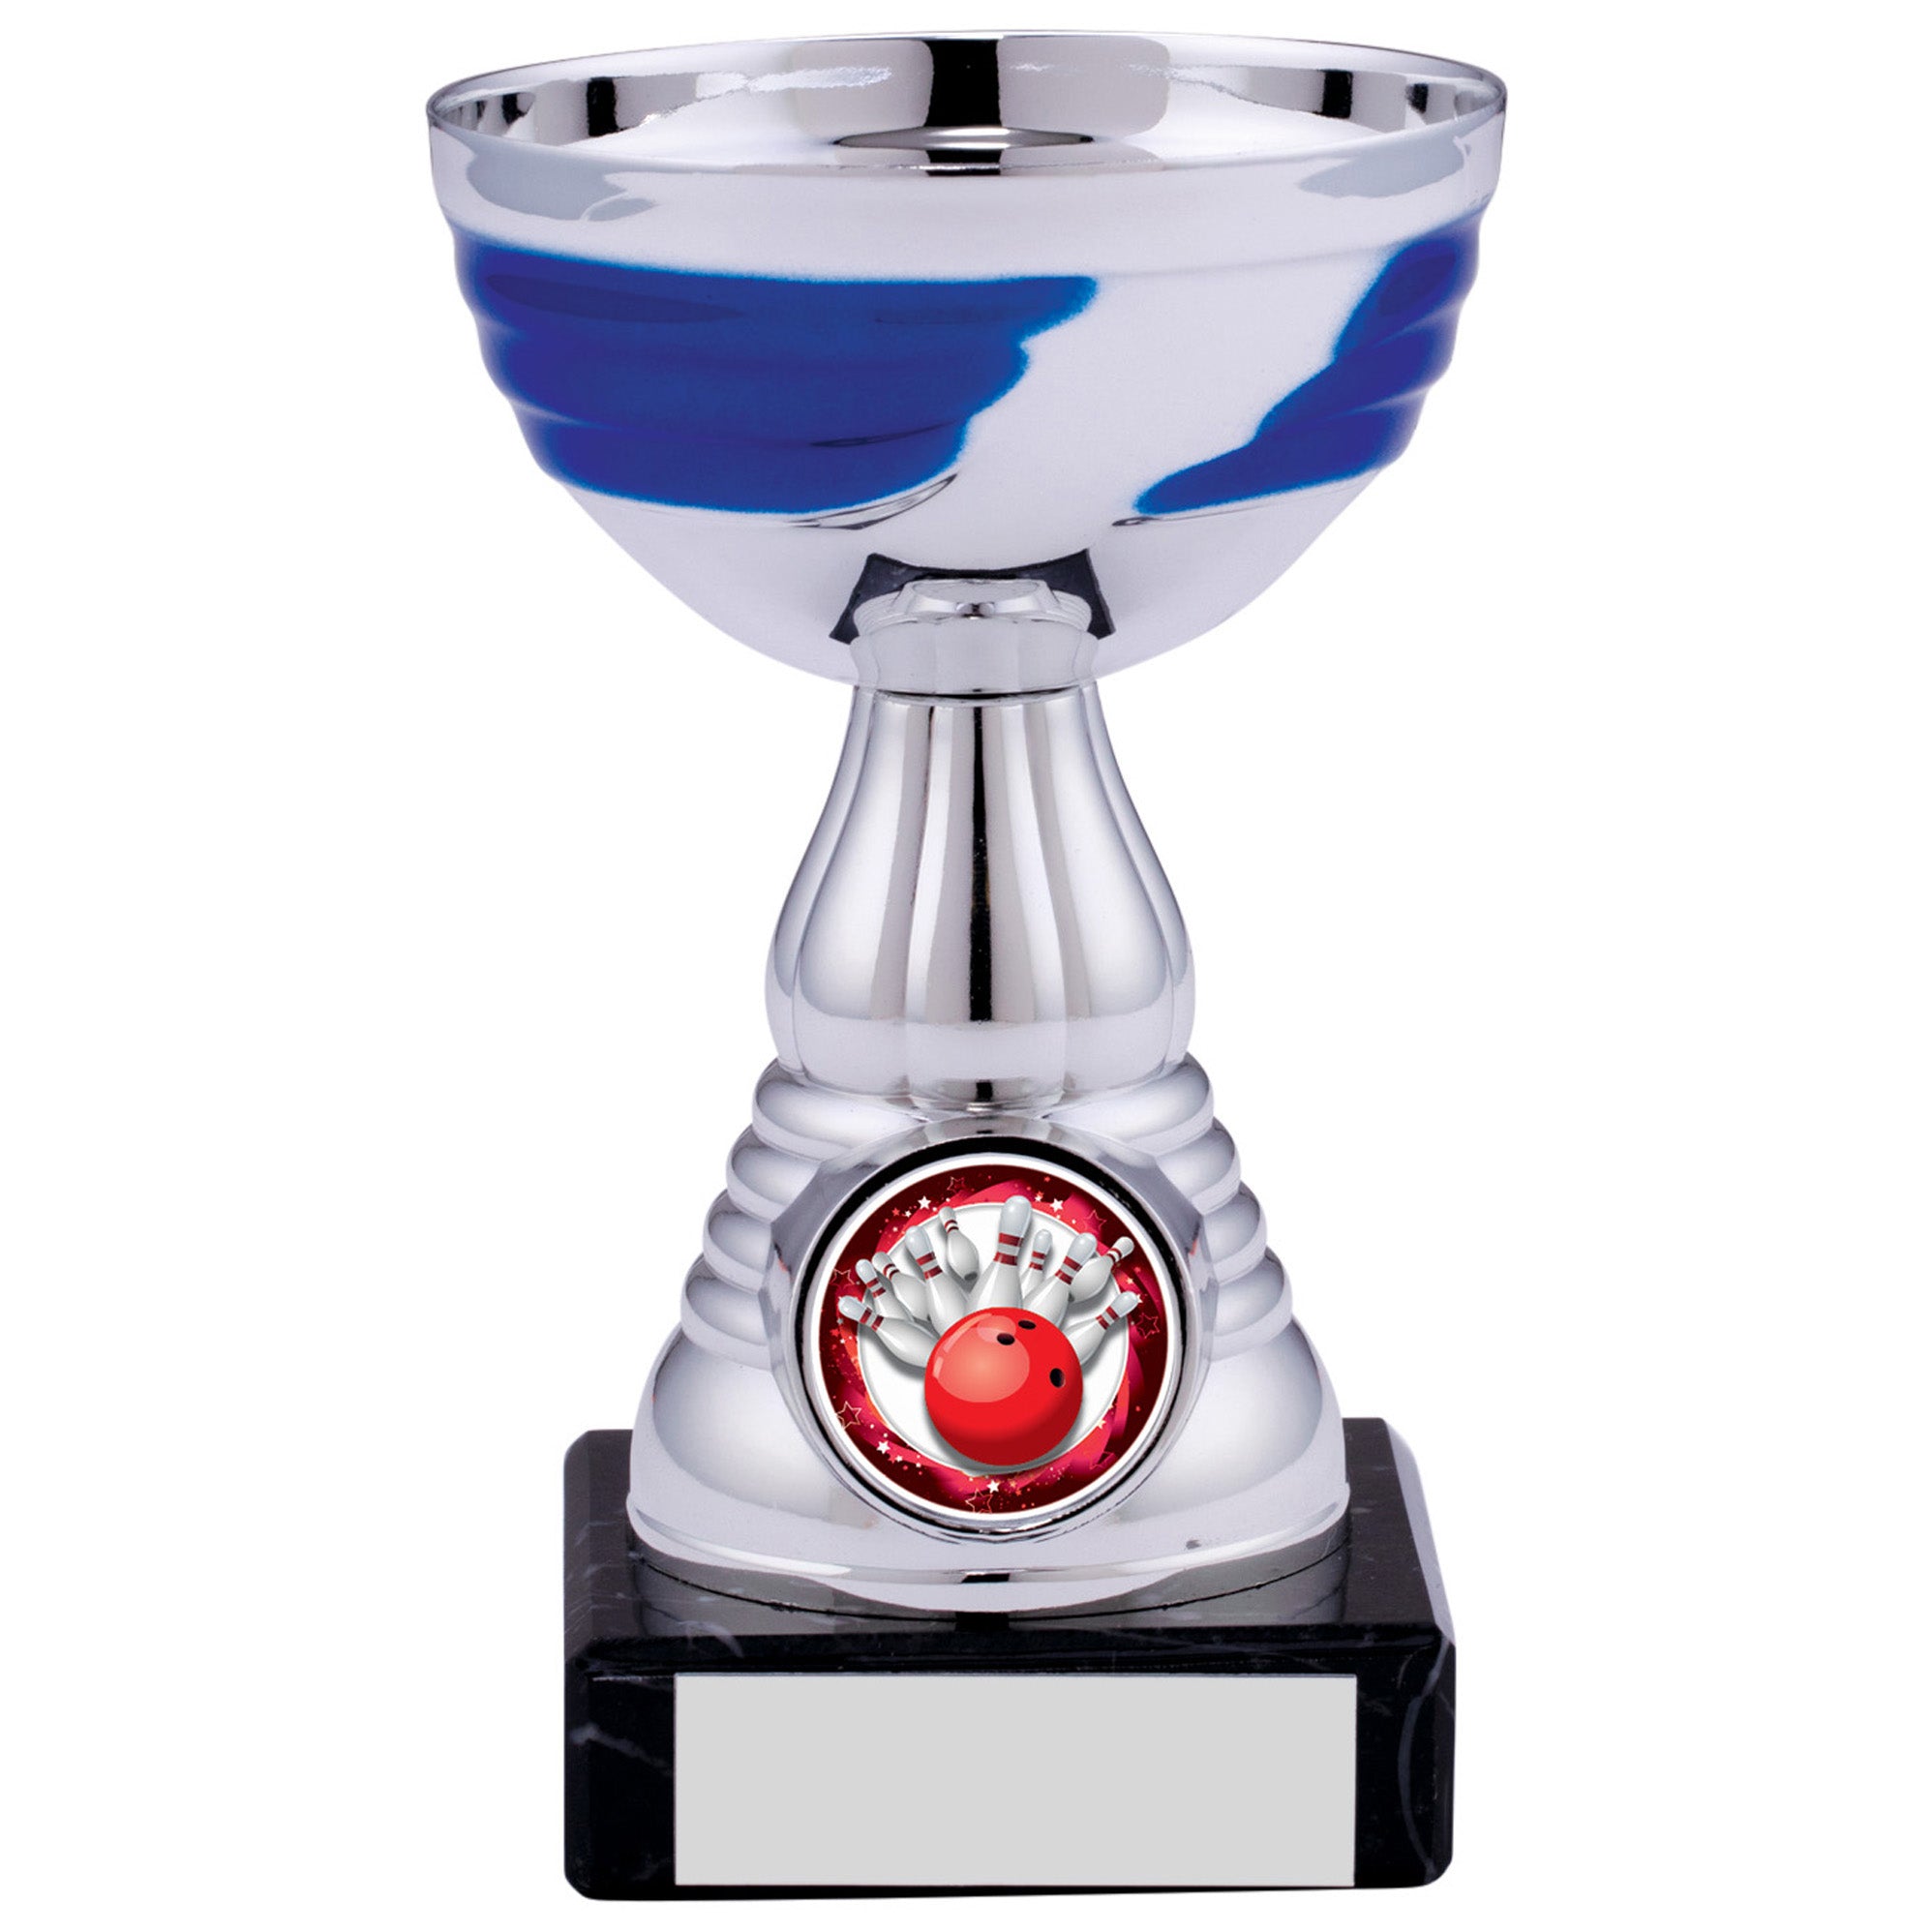 Silver Blue Trophy Cup with Blue Highlights on Black Marble Base